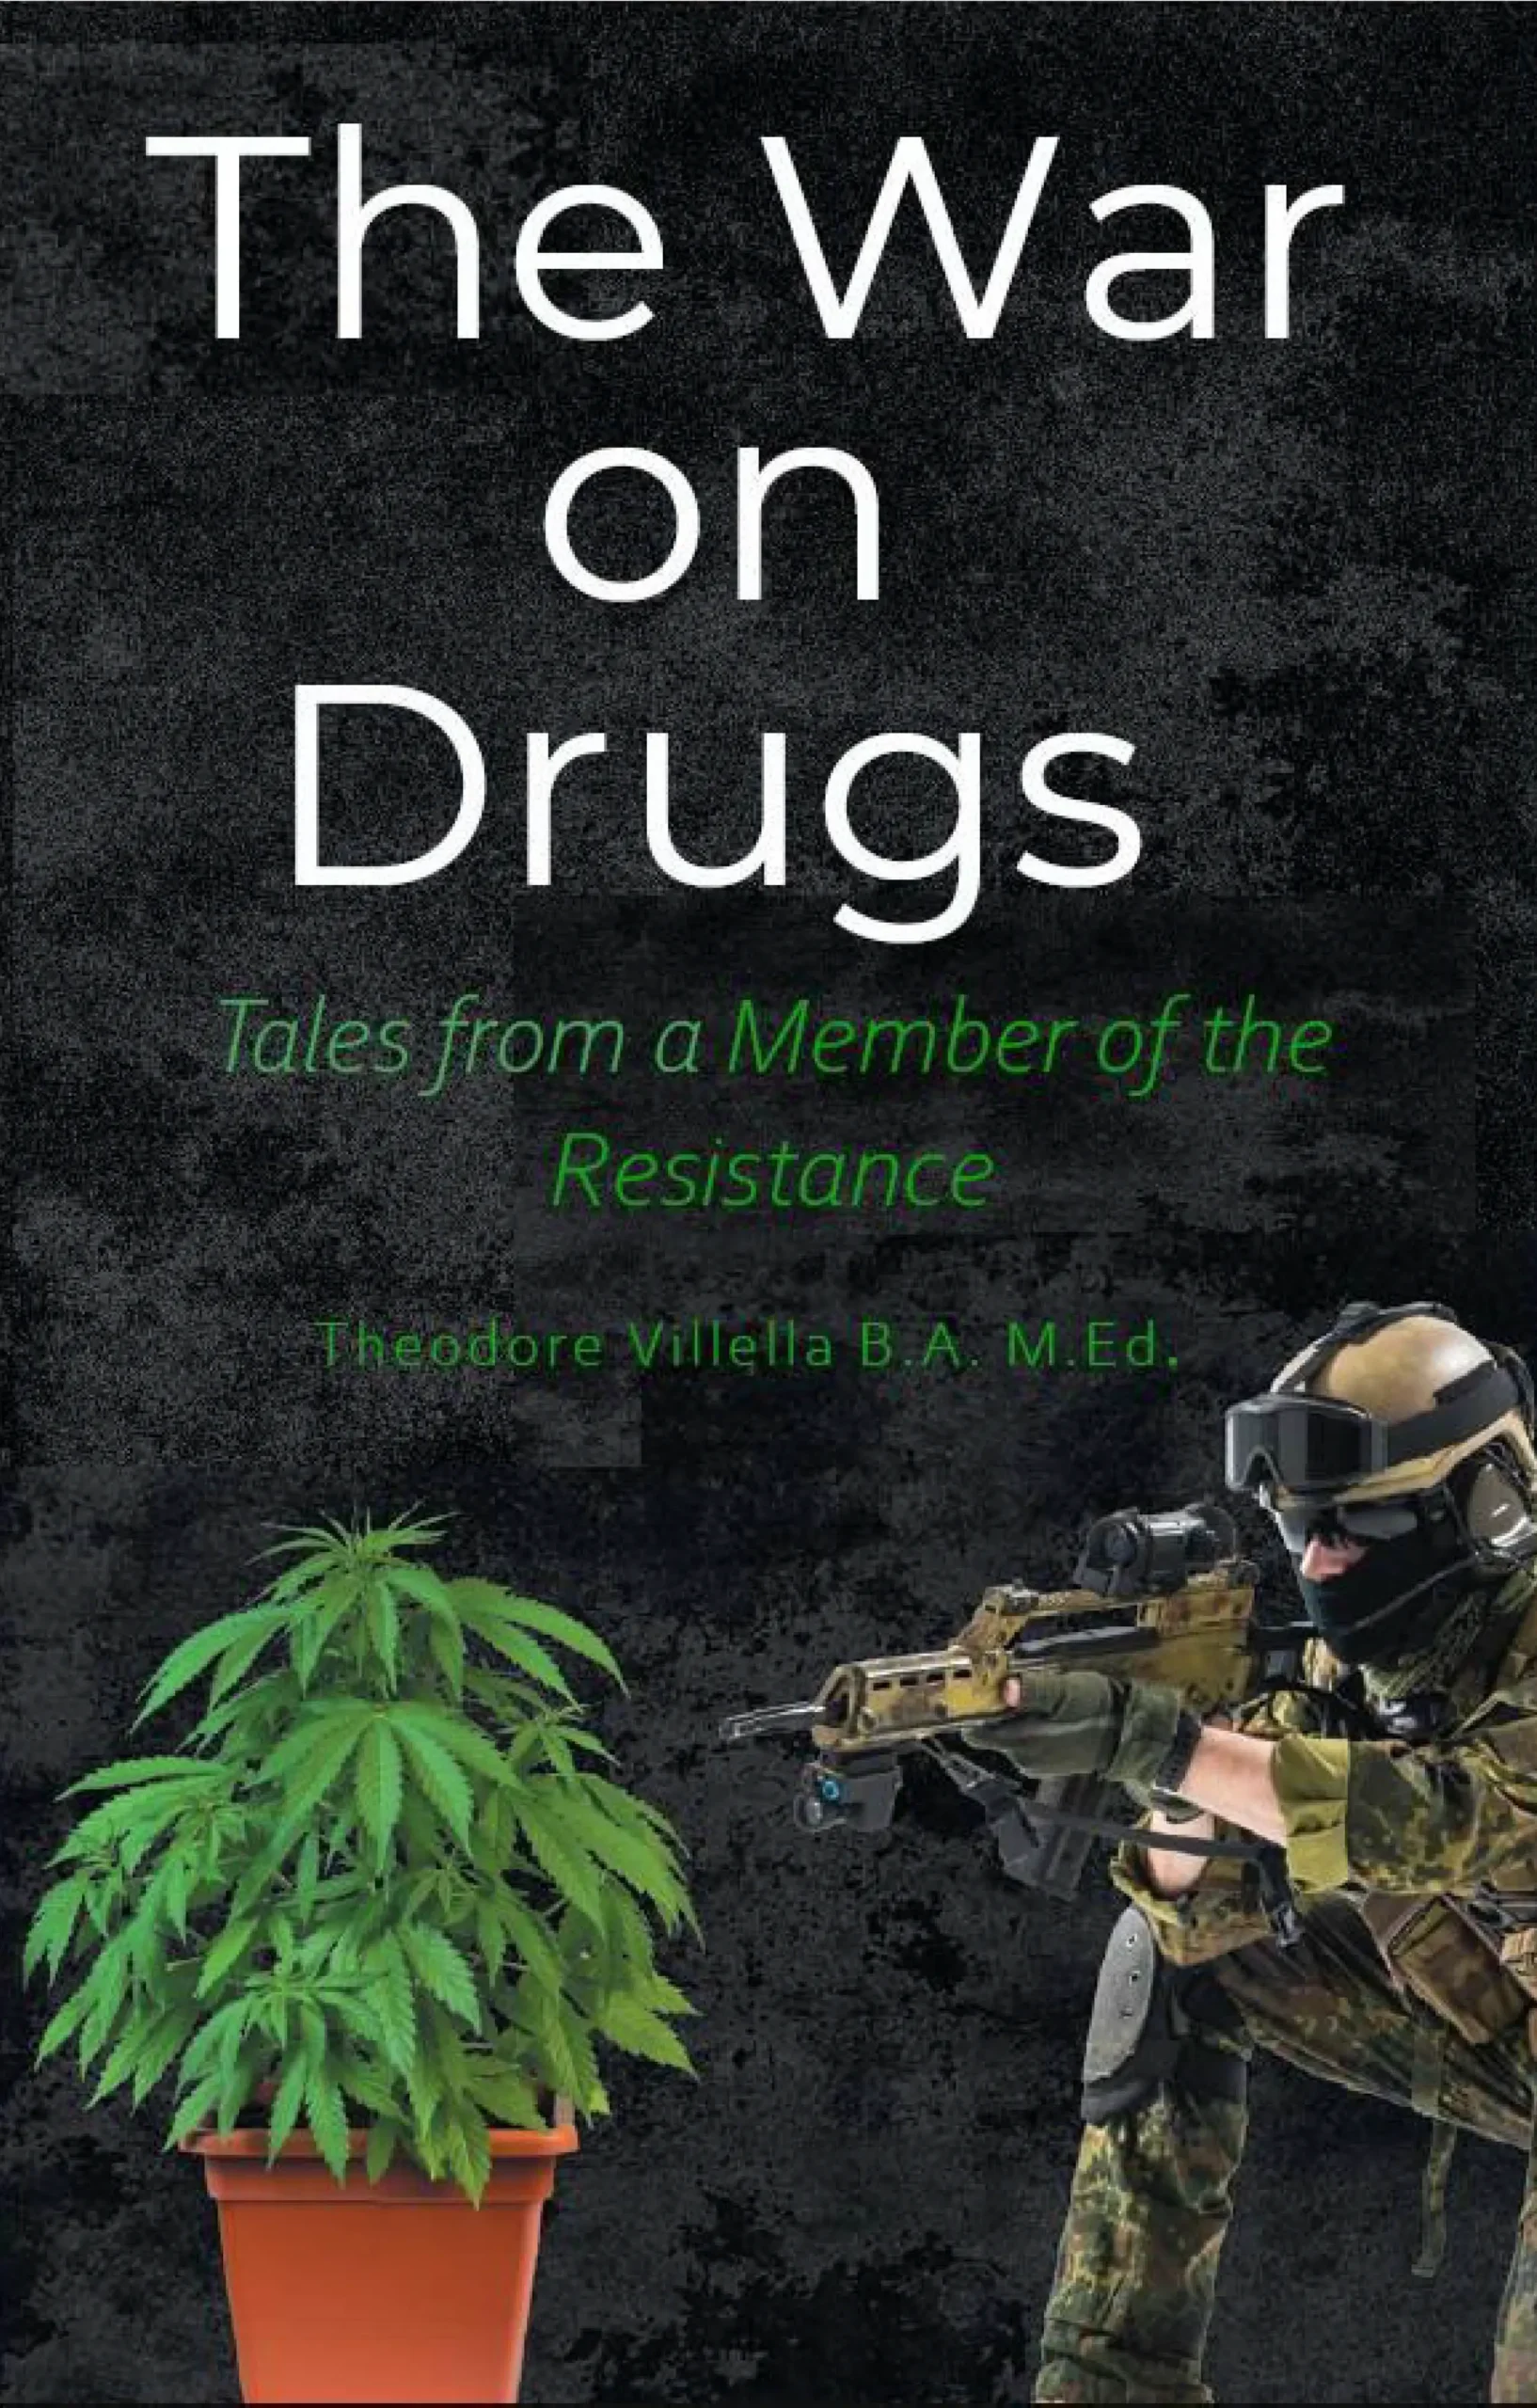 The War on Drugs Tales from a Member of the Resistance 2023 Edition Theodore Villella B.A. M.Ed. book front cover